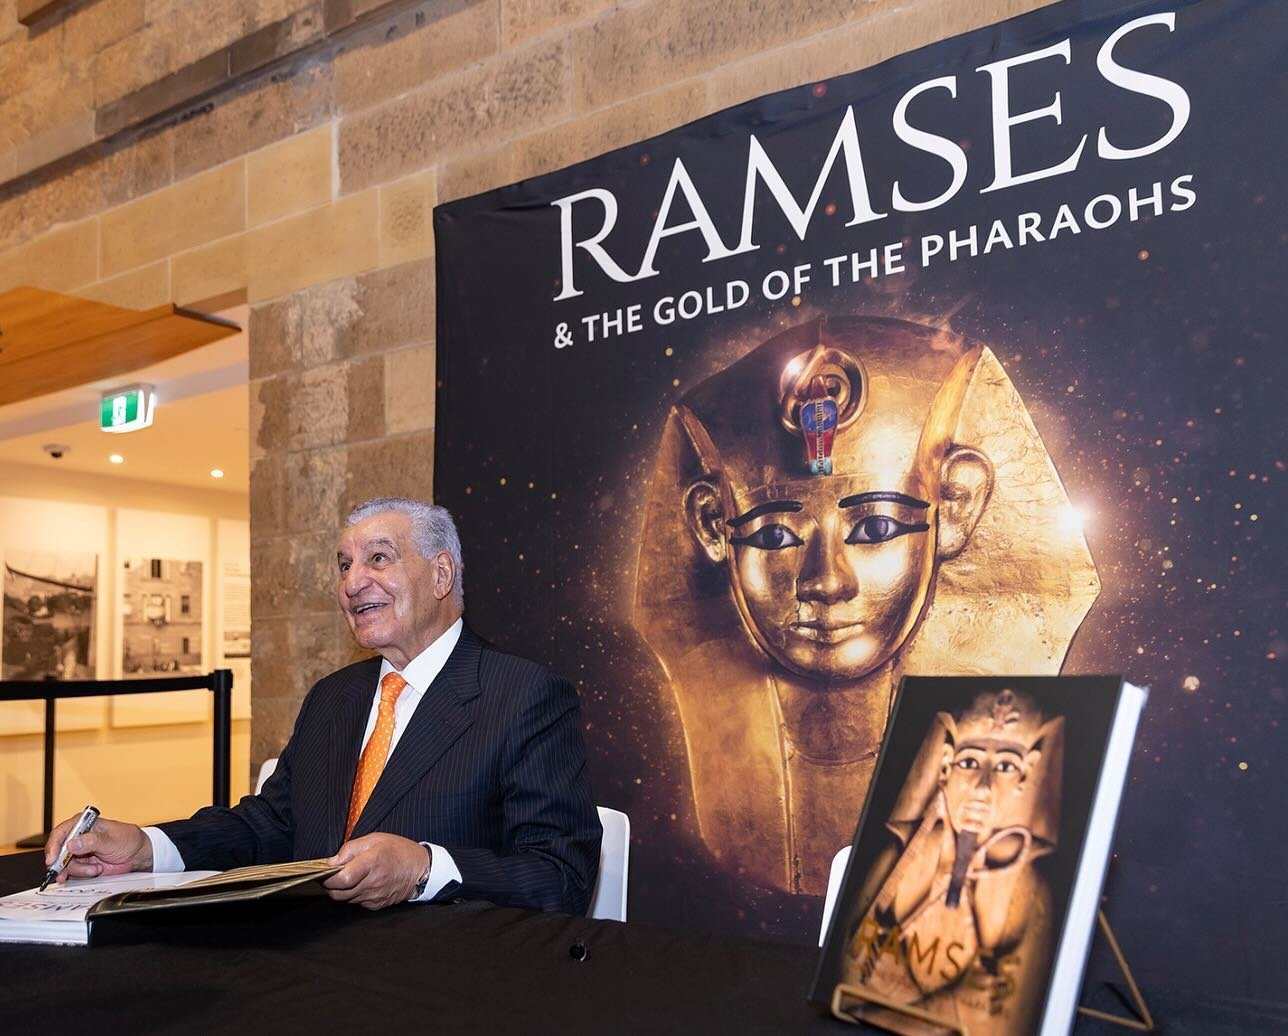 I went to Sydney to give a lecture to promote the Ramses II exhibit that is now shown at the @australianmuseum headed by my friend Kim McKay. My lecture was sold out with 1200 attendees, all the ticket sales went to the museum and to Egypt. 

Kim McK